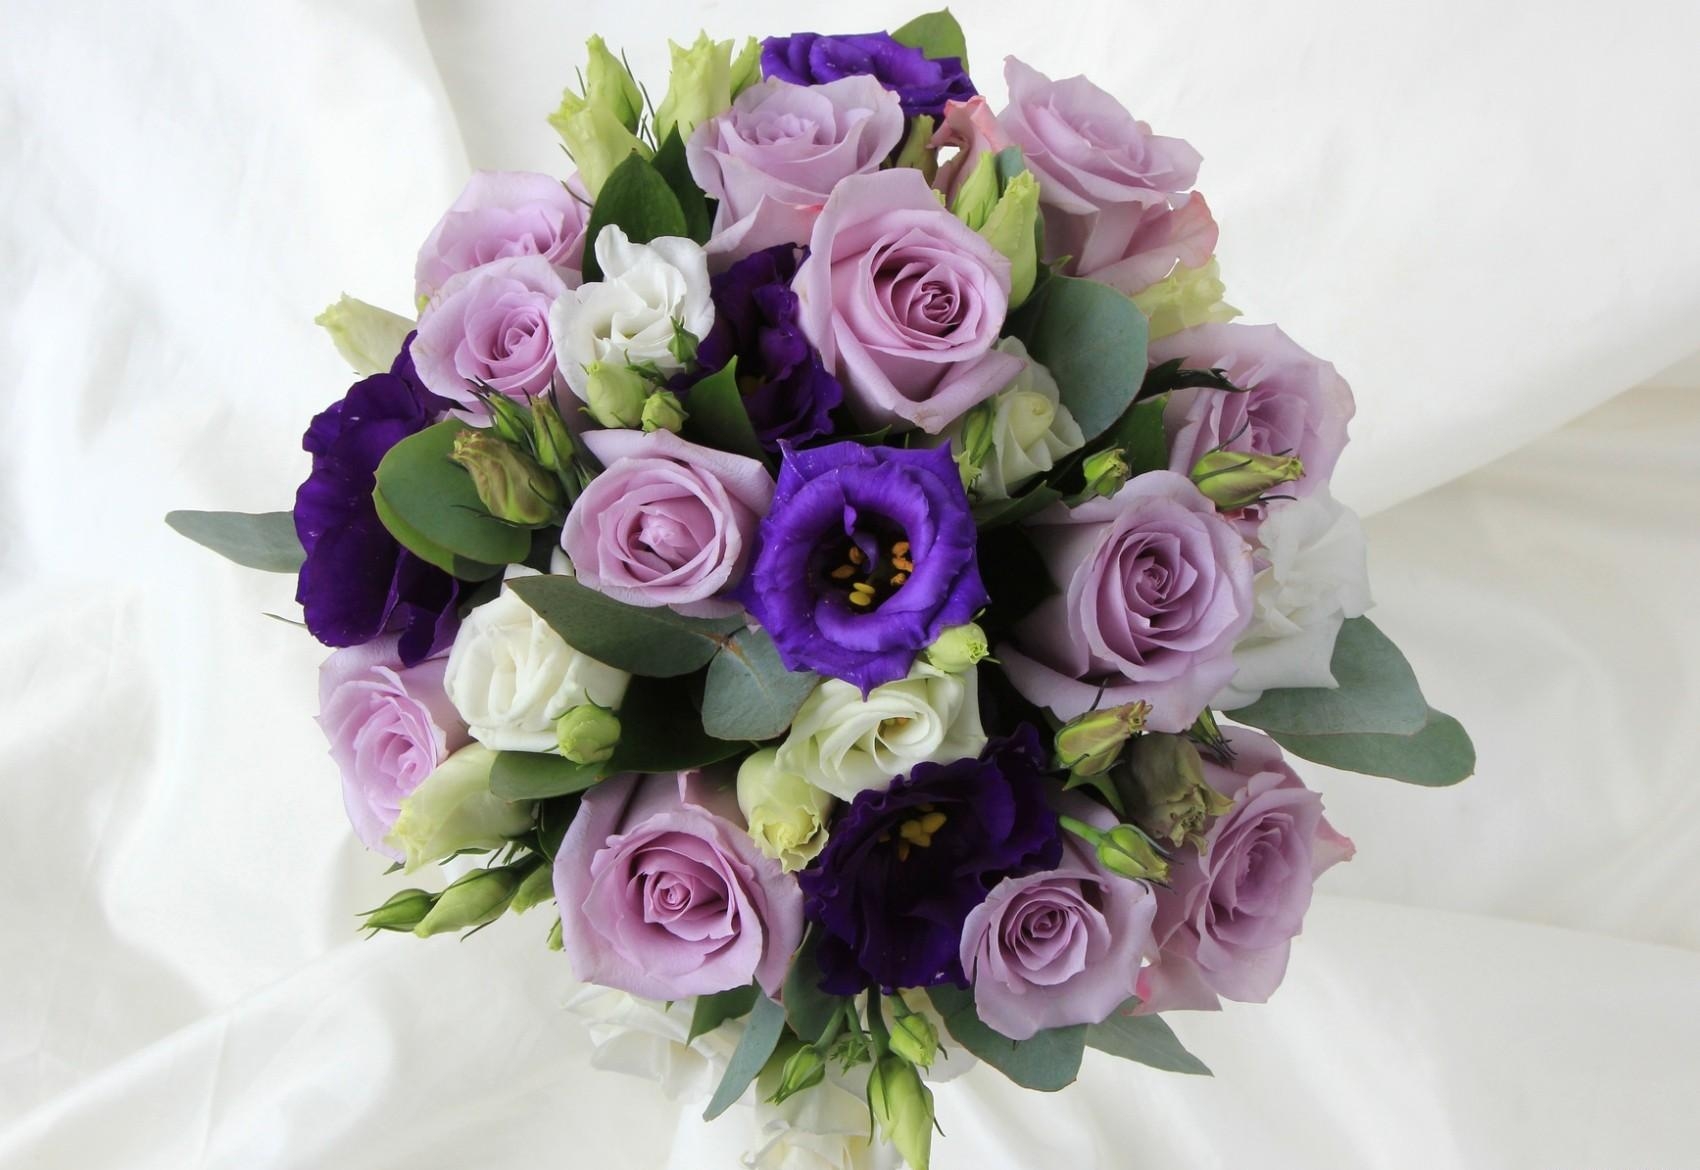 flowers, roses, bouquet, composition, lisianthus russell, lisiantus russell